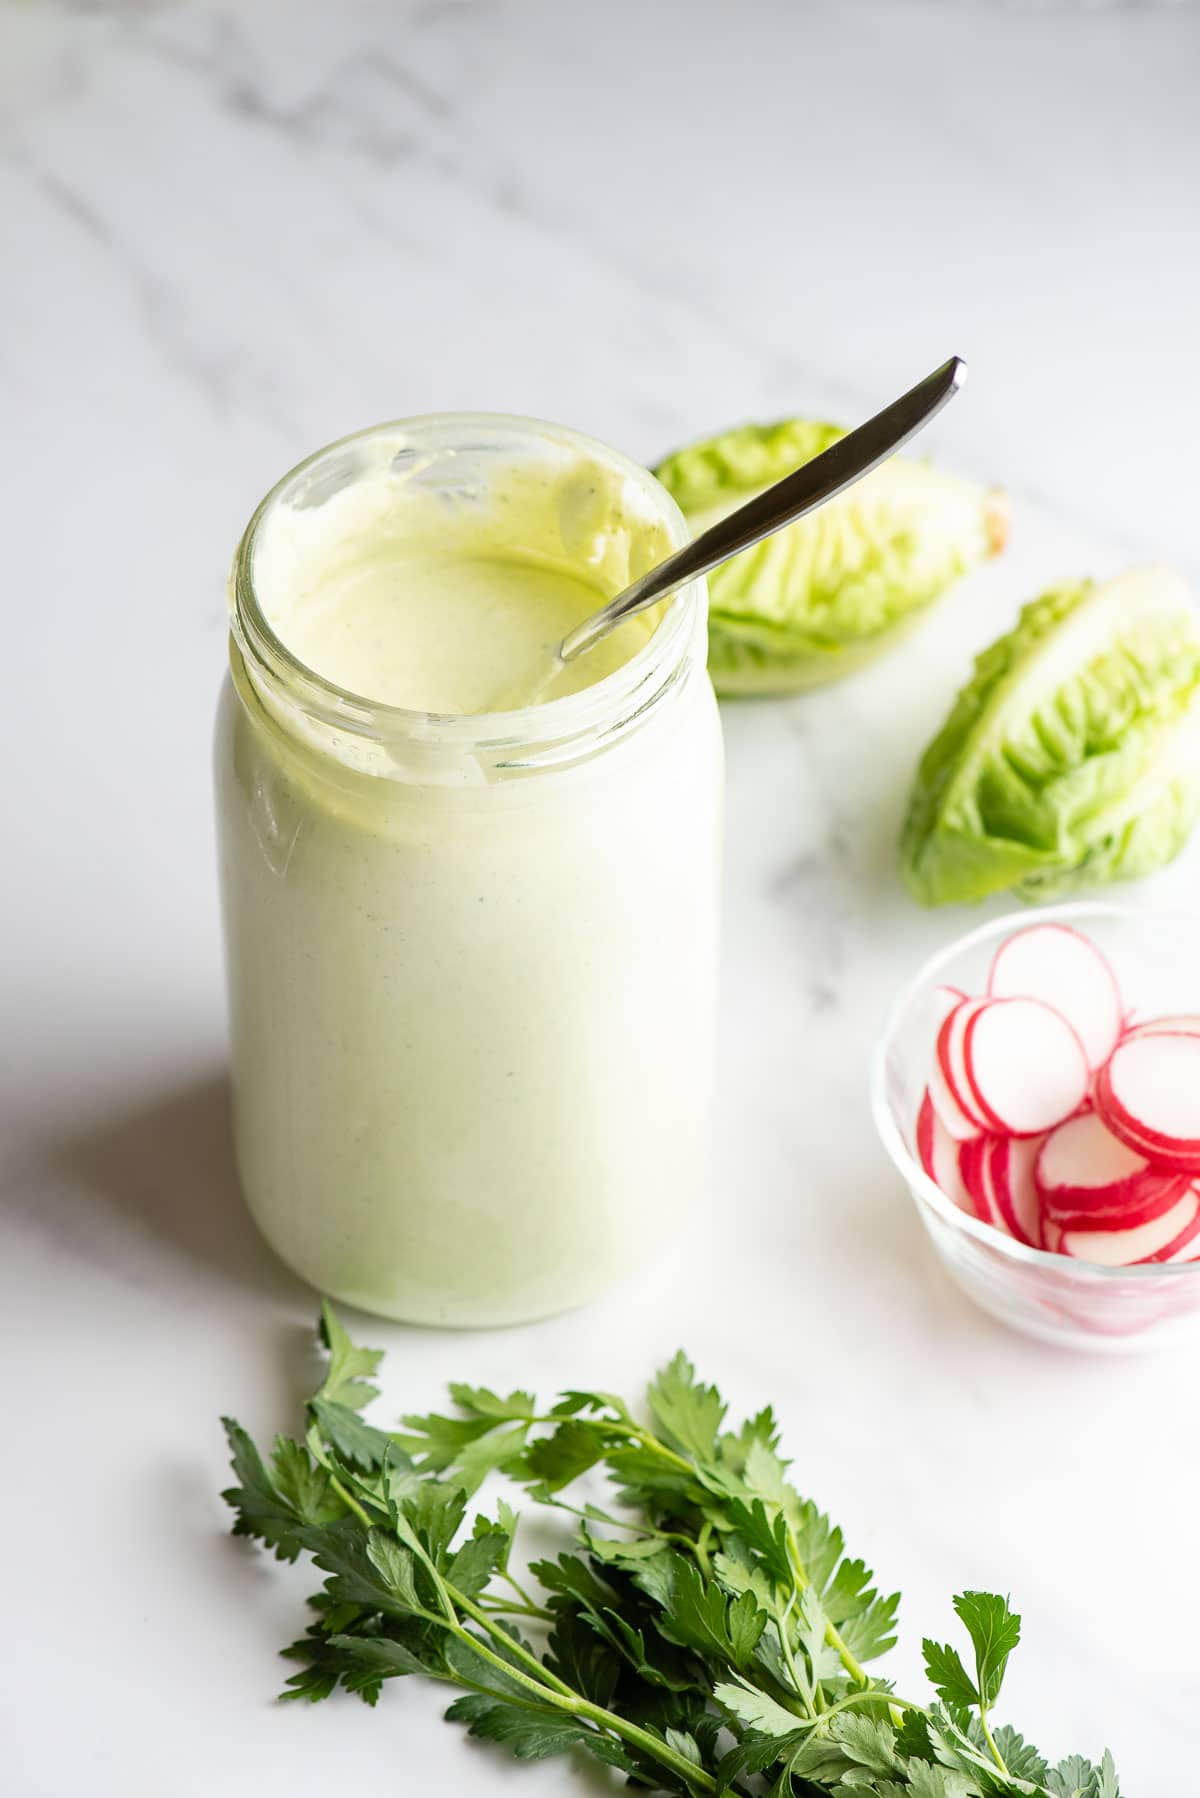 Green Goddess Dressing in a Mason jar with lettuce, parsley and sliced radishes